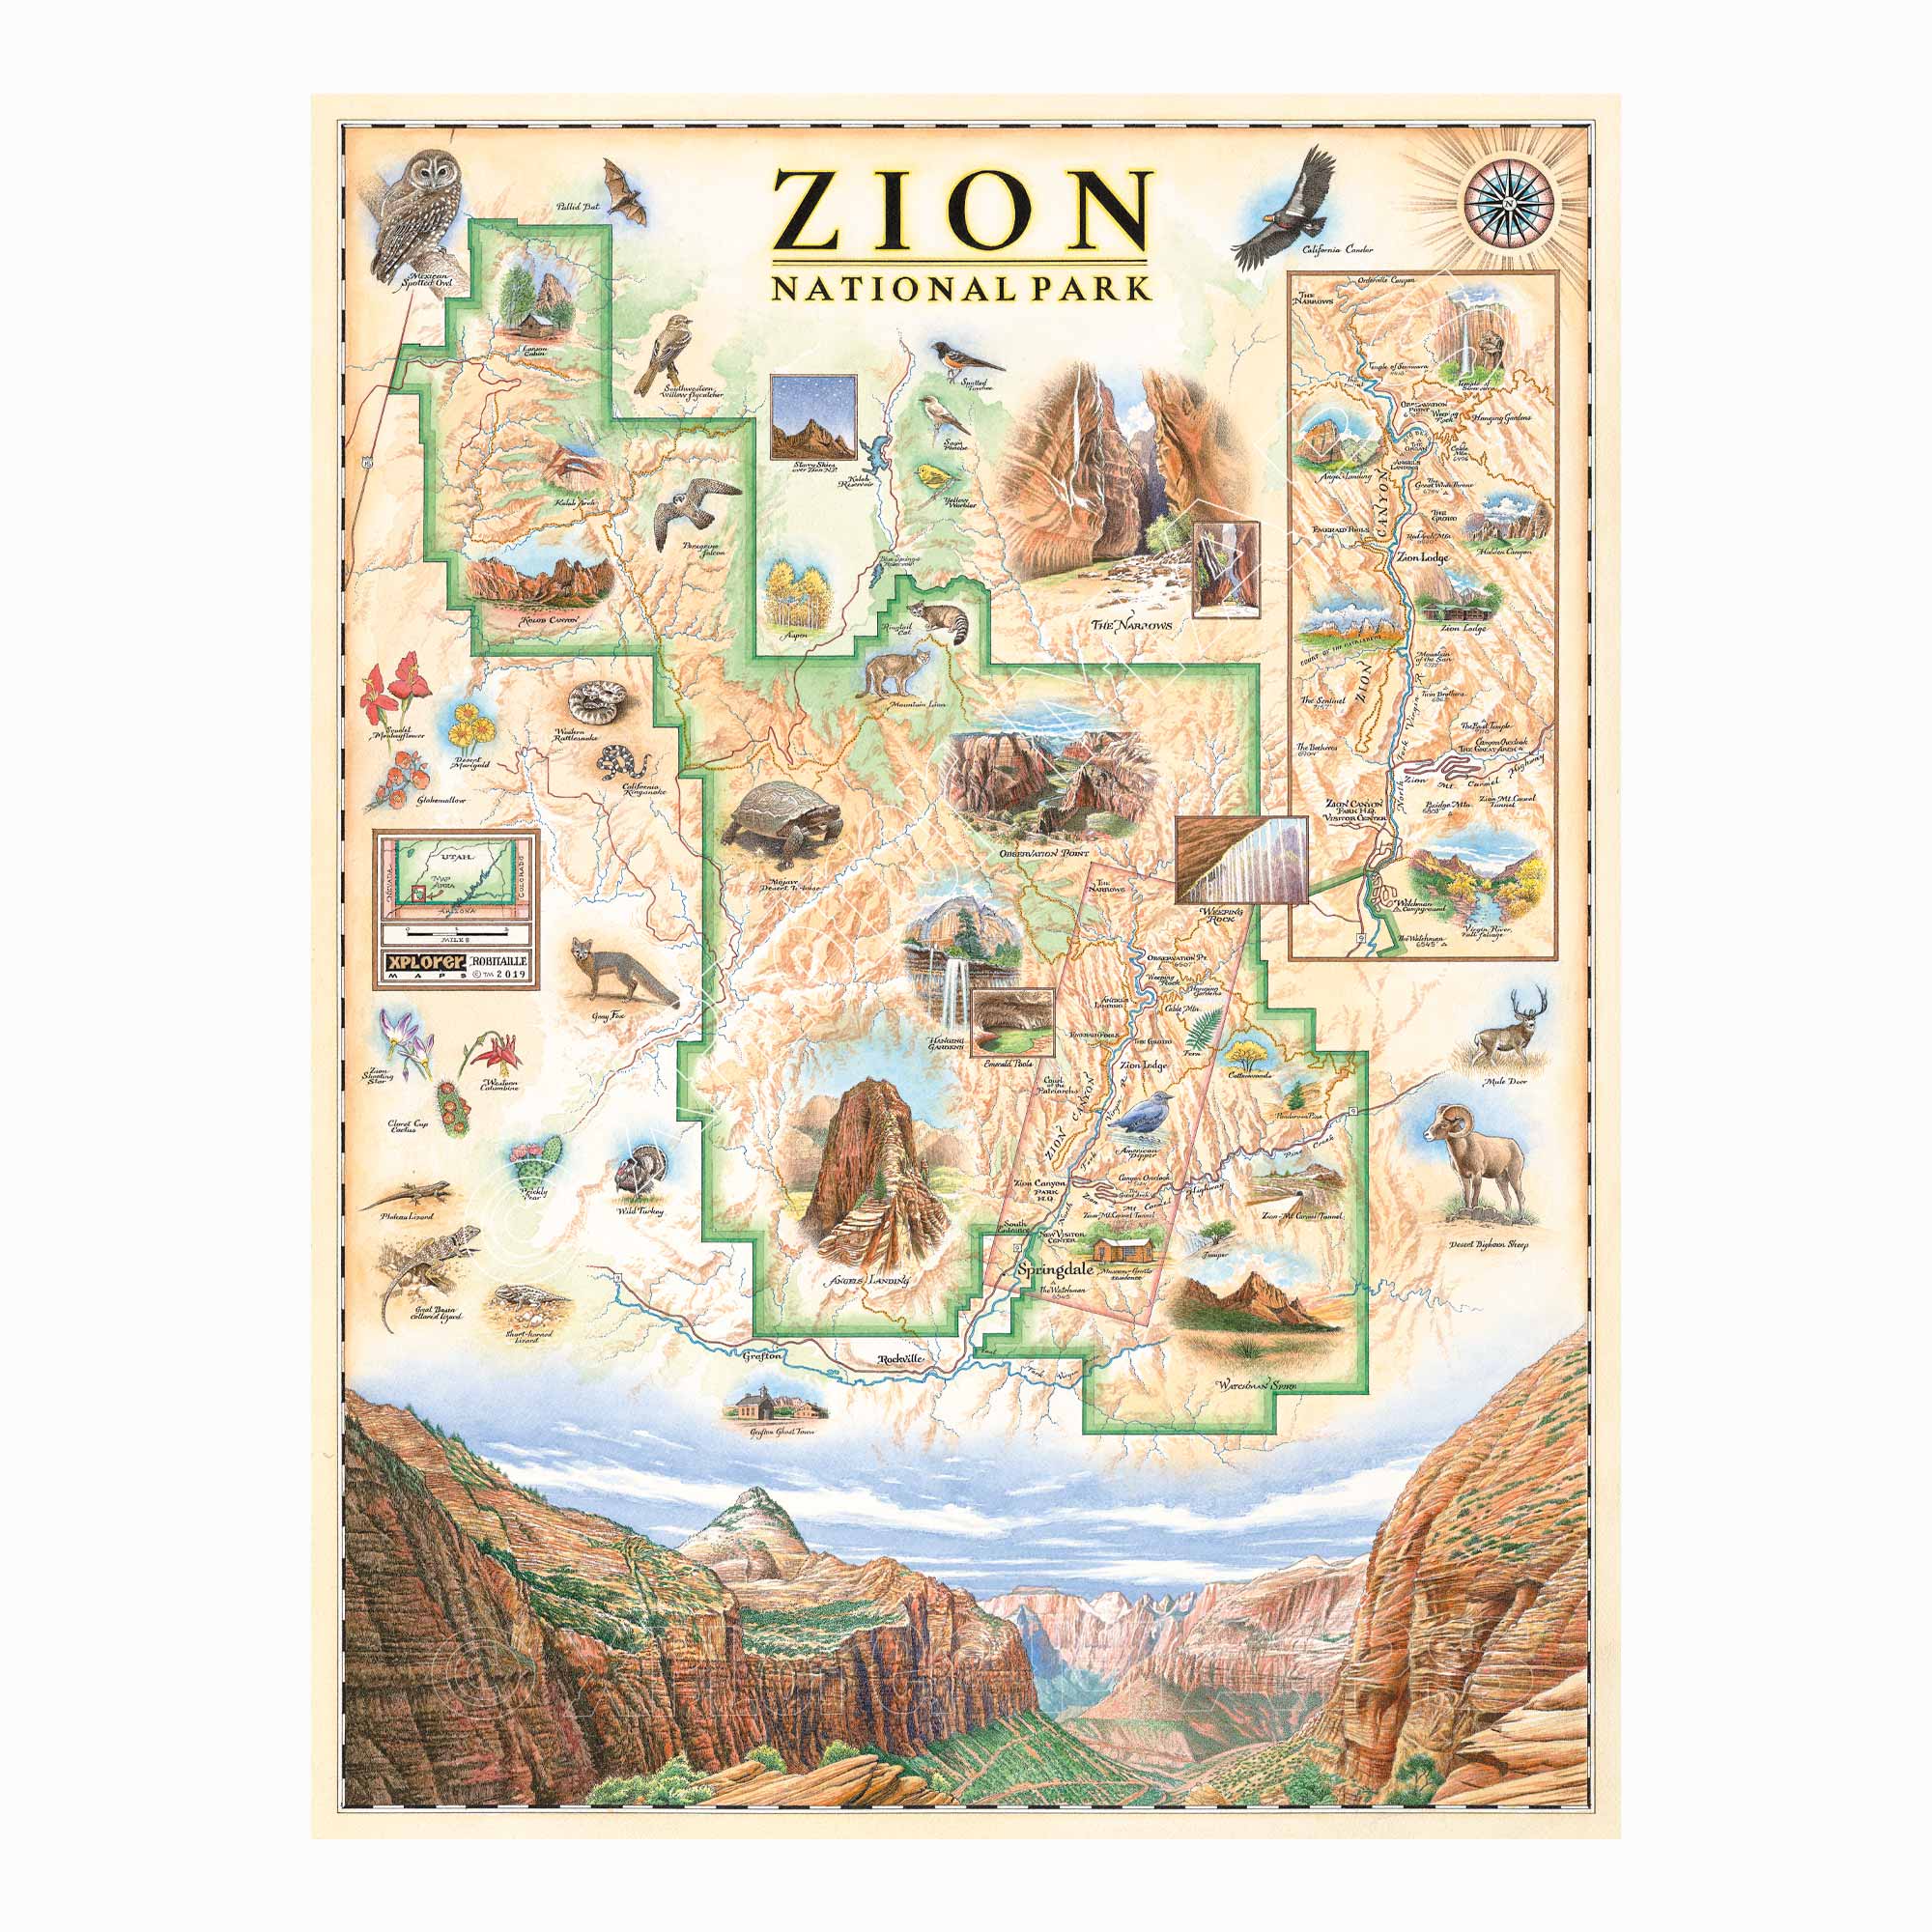 Zion National Park hand-drawn map in beige, brown, and orange earth tones. The map features illustrations of Angels Landing, Weeping Rock, The Narrows, and Kolob Canyon. Flora and fauna include Mojave desert tortoise, western columbine, and desert marigold. Measures 18x24.